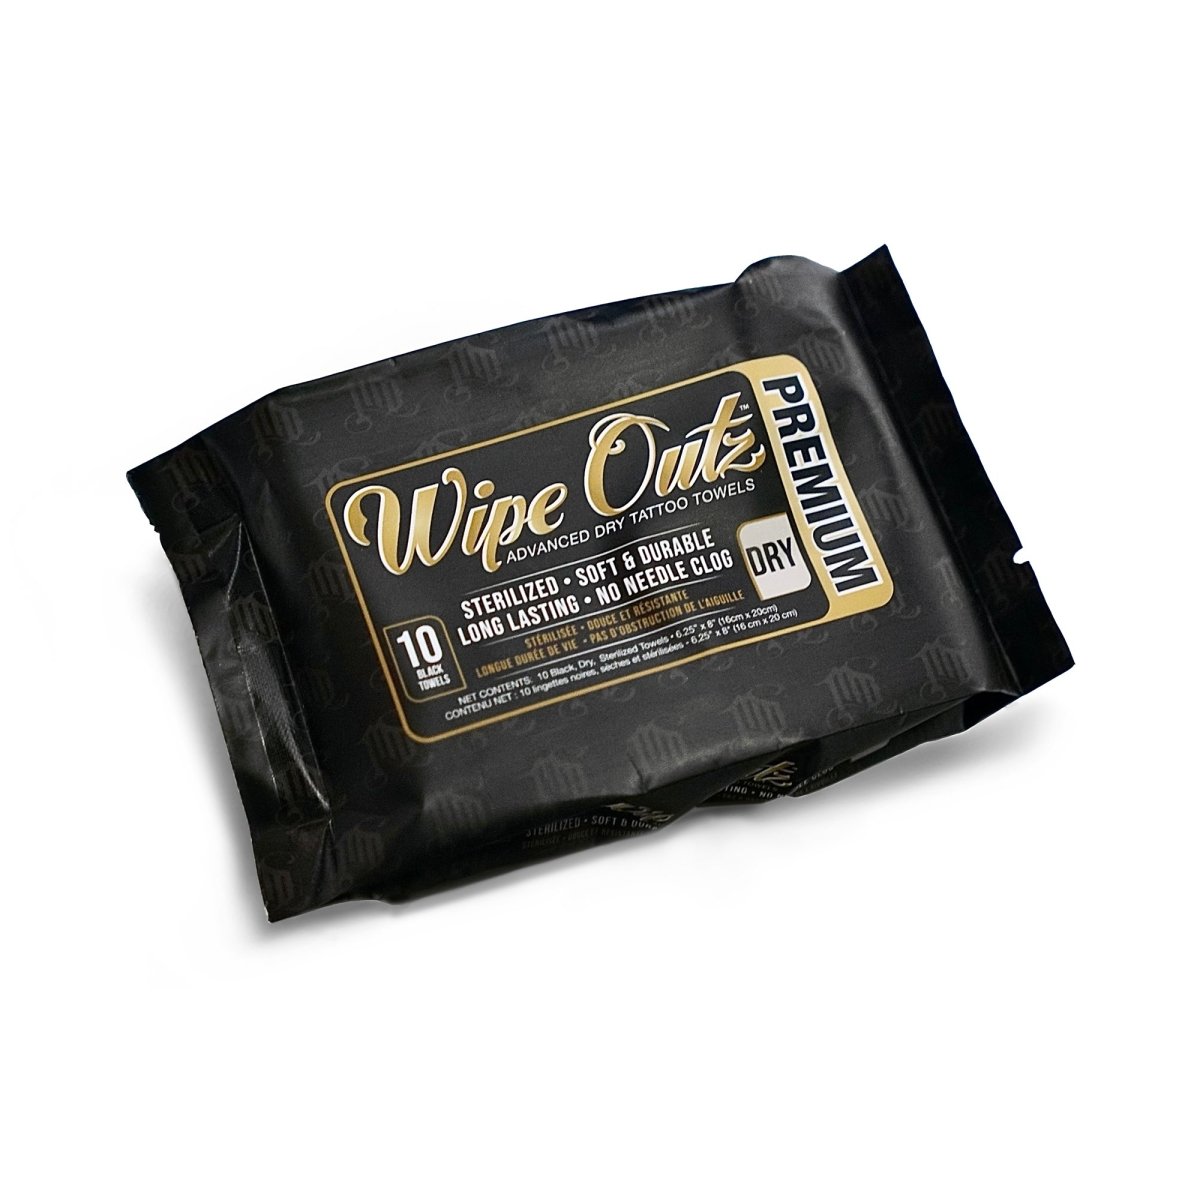 Wipe Outz Premium Dry Tattoo Towels (Black 10 Count)